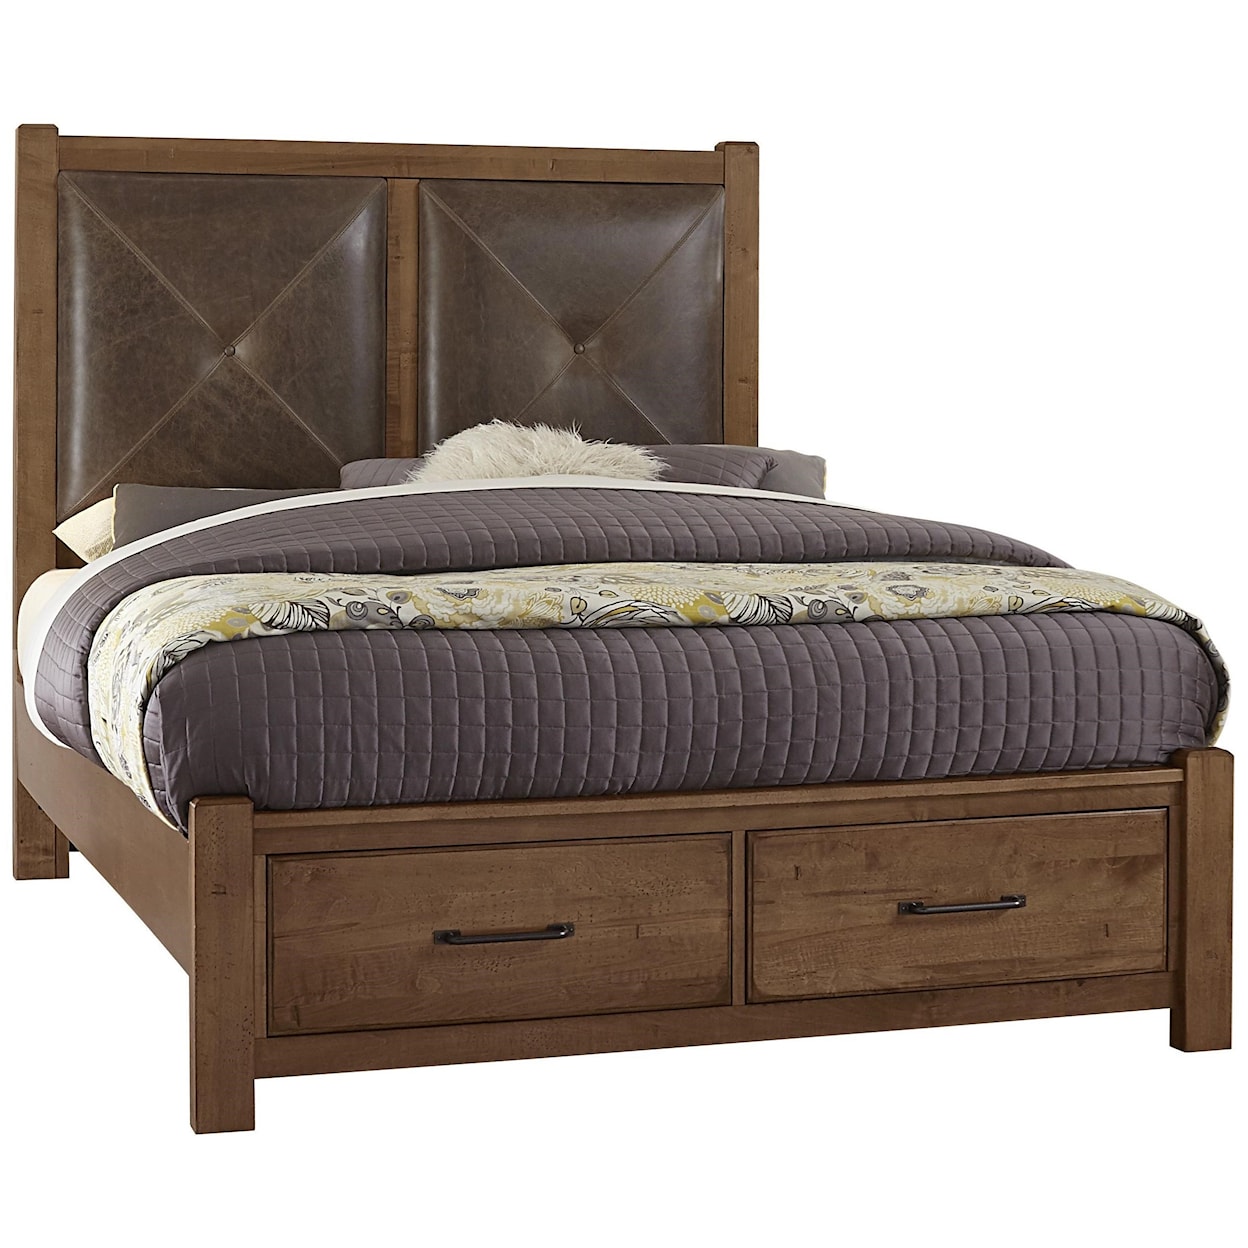 Artisan & Post Cool Rustic Queen Leather Bed with Storage Footboard